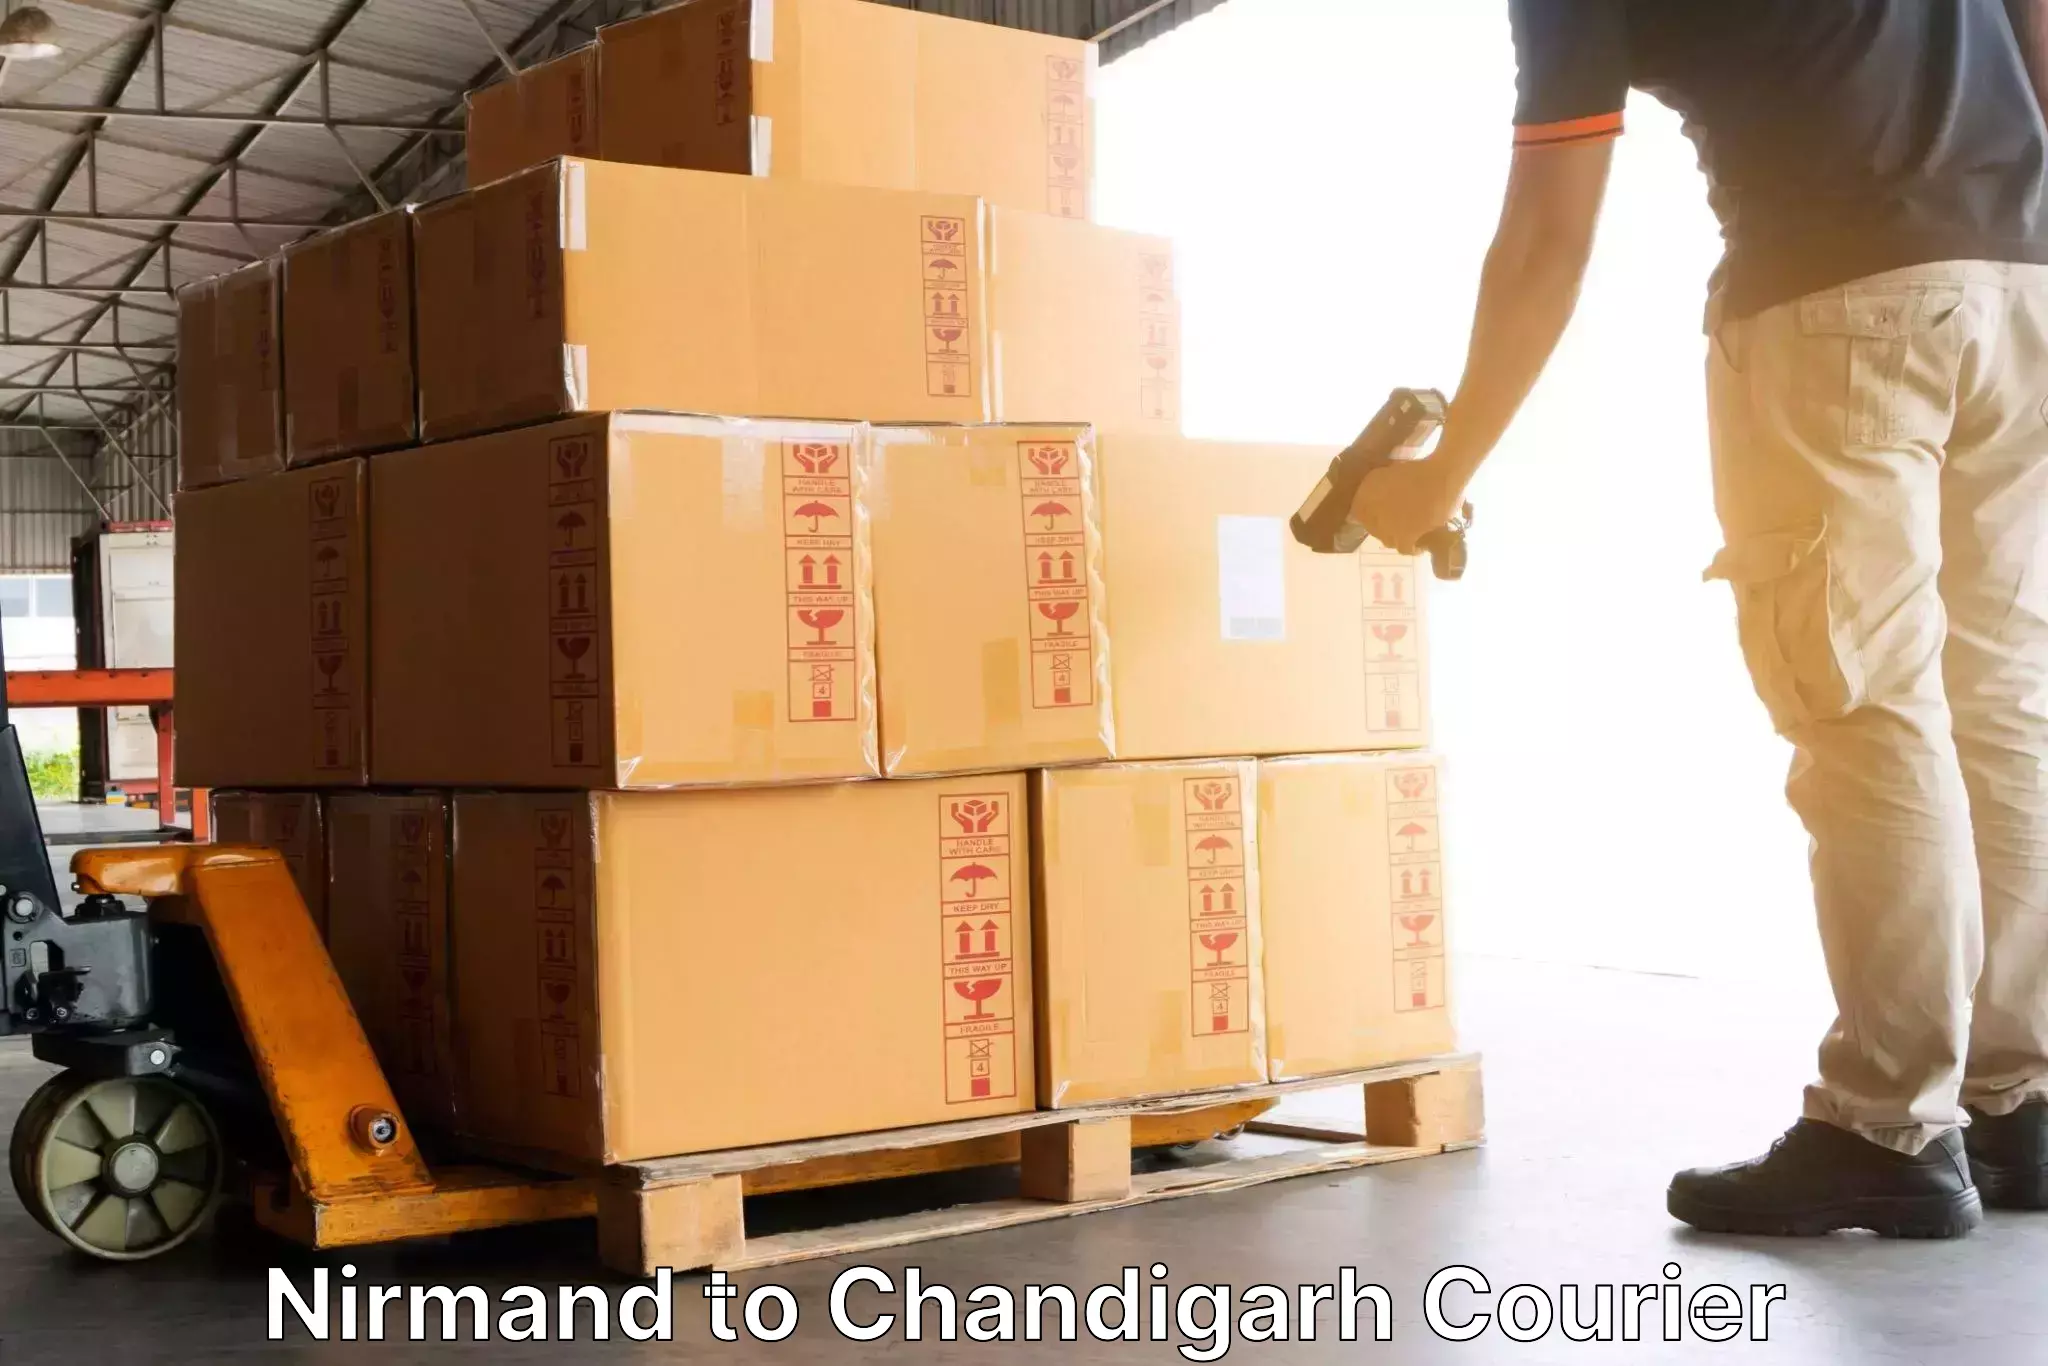 Same-day delivery options Nirmand to Chandigarh